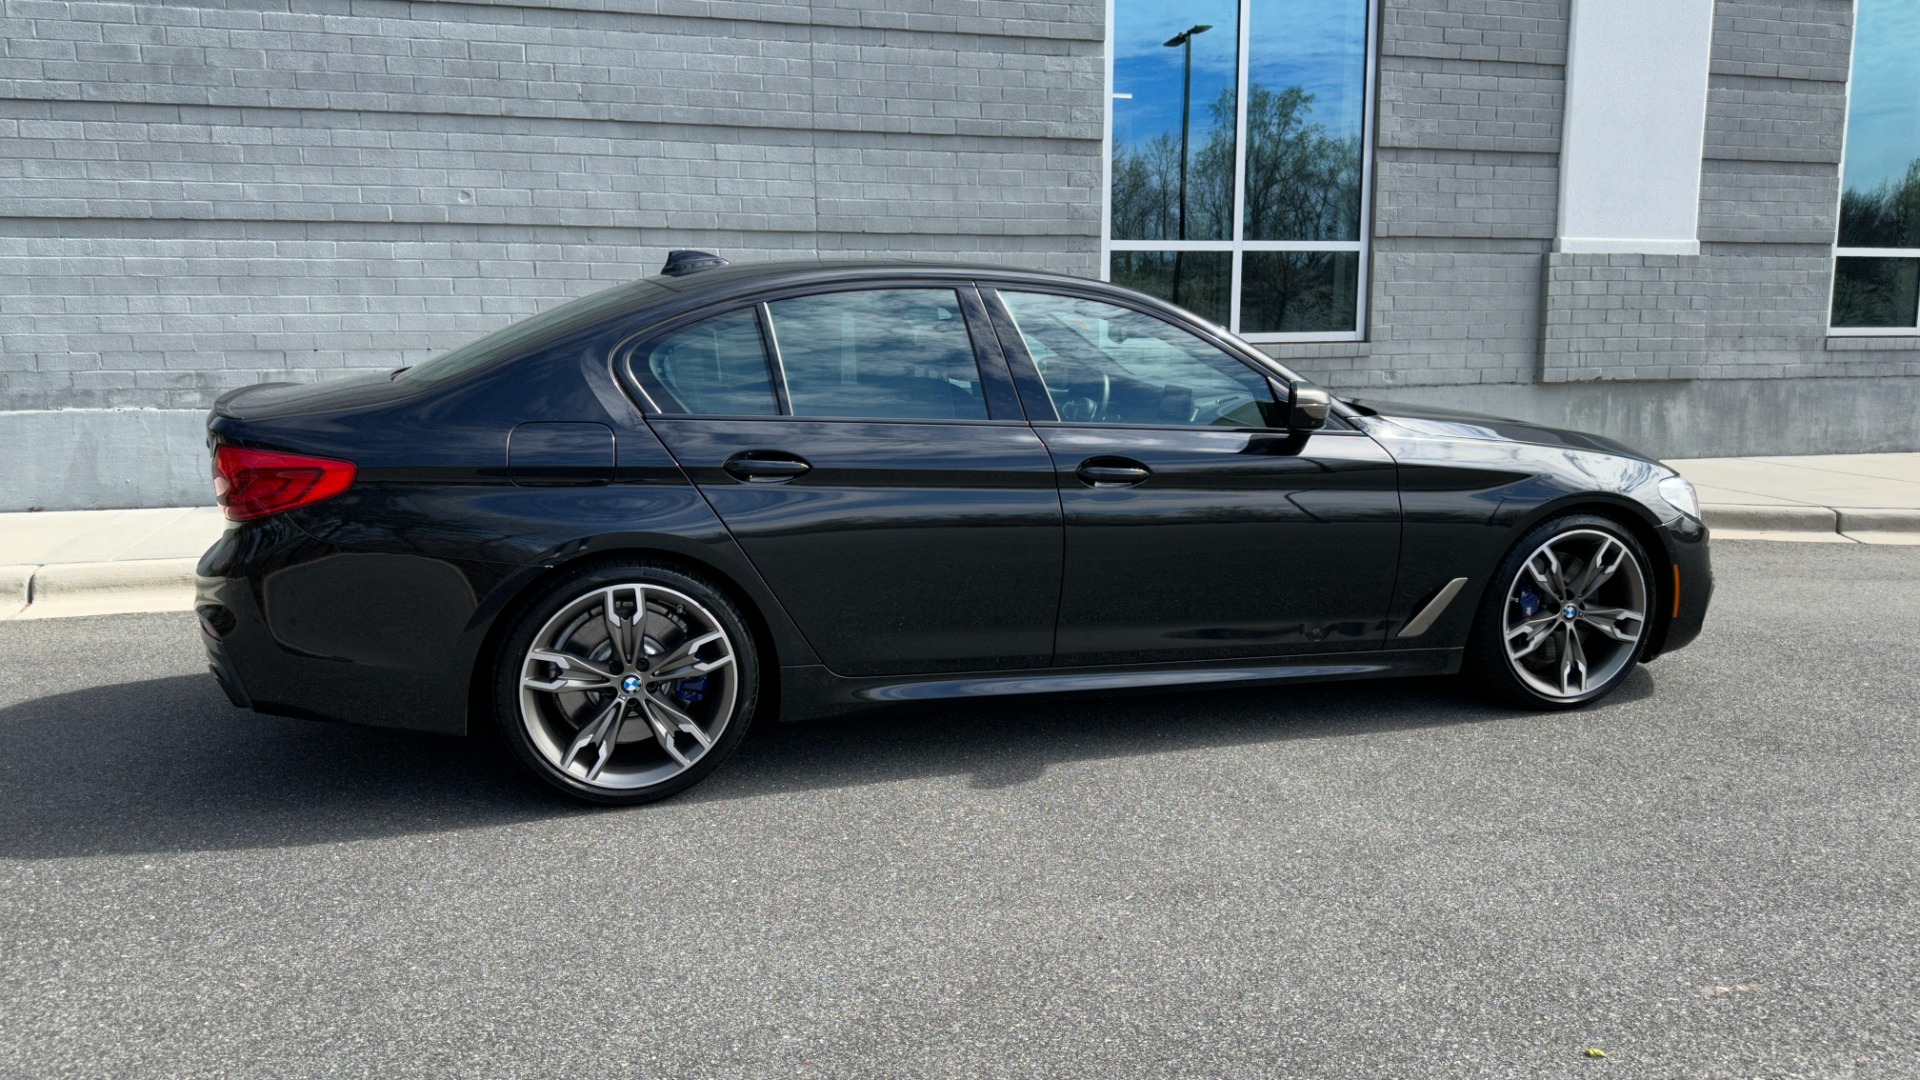 Used 2020 BMW 5 Series M550i xDrive / 20IN WHEELS/ DRIVE ASSIST PLUS / EXECUTIVE PACKAGE / HEATED  for sale Sold at Formula Imports in Charlotte NC 28227 6